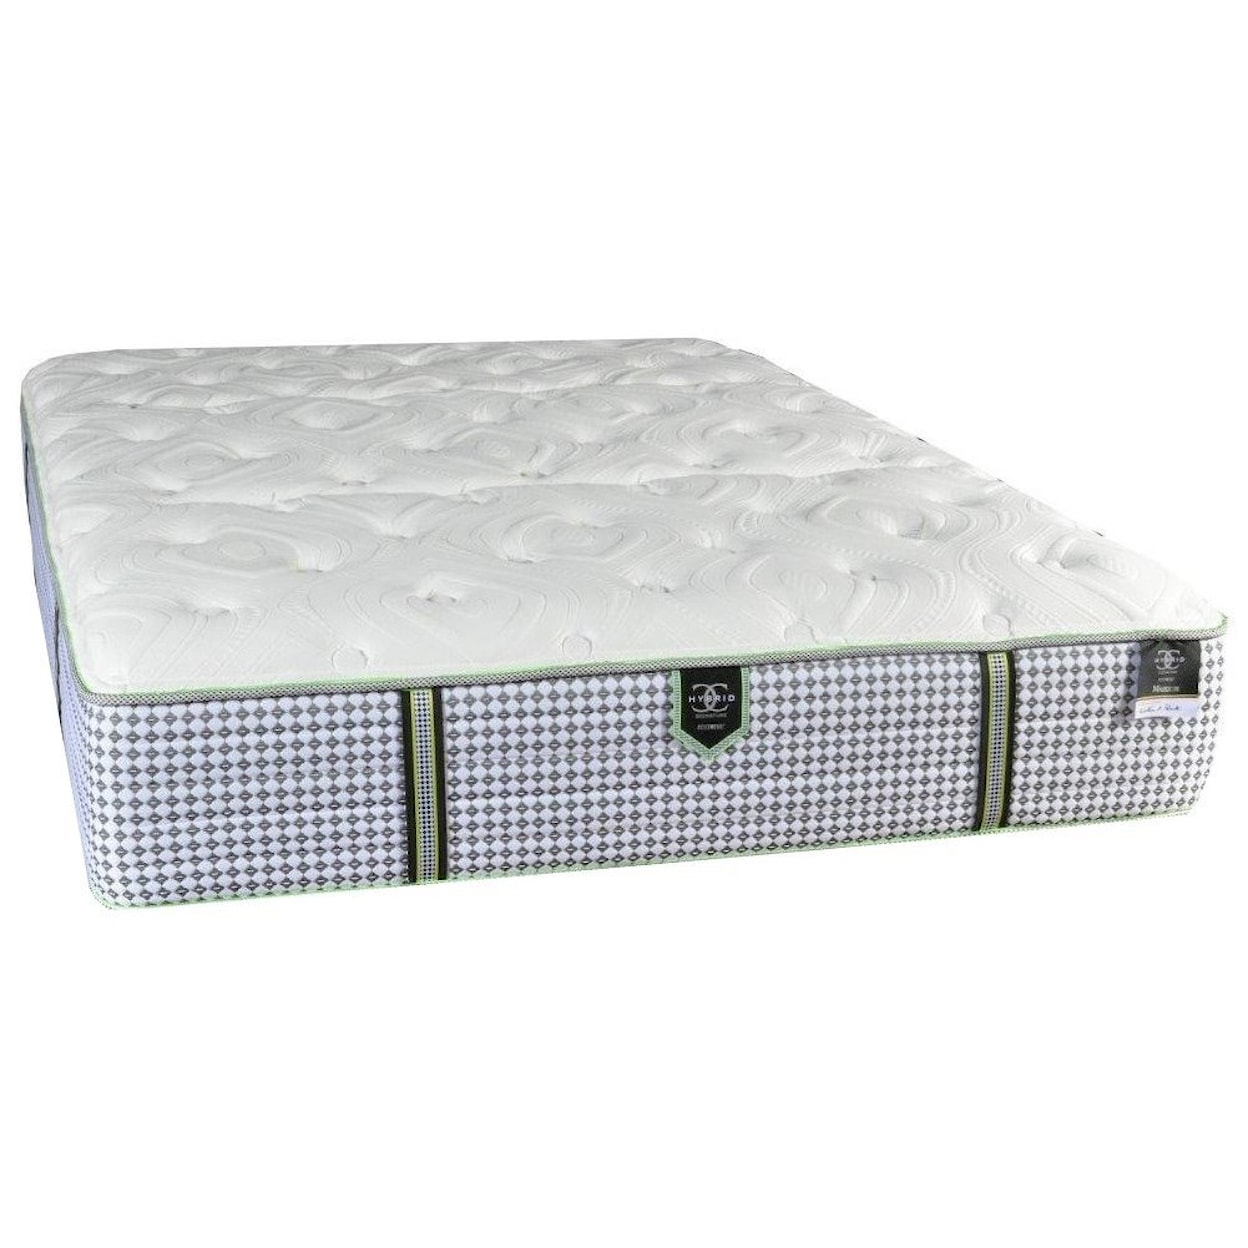 Restonic Marquis Plush Full Pocketed Coil Mattress